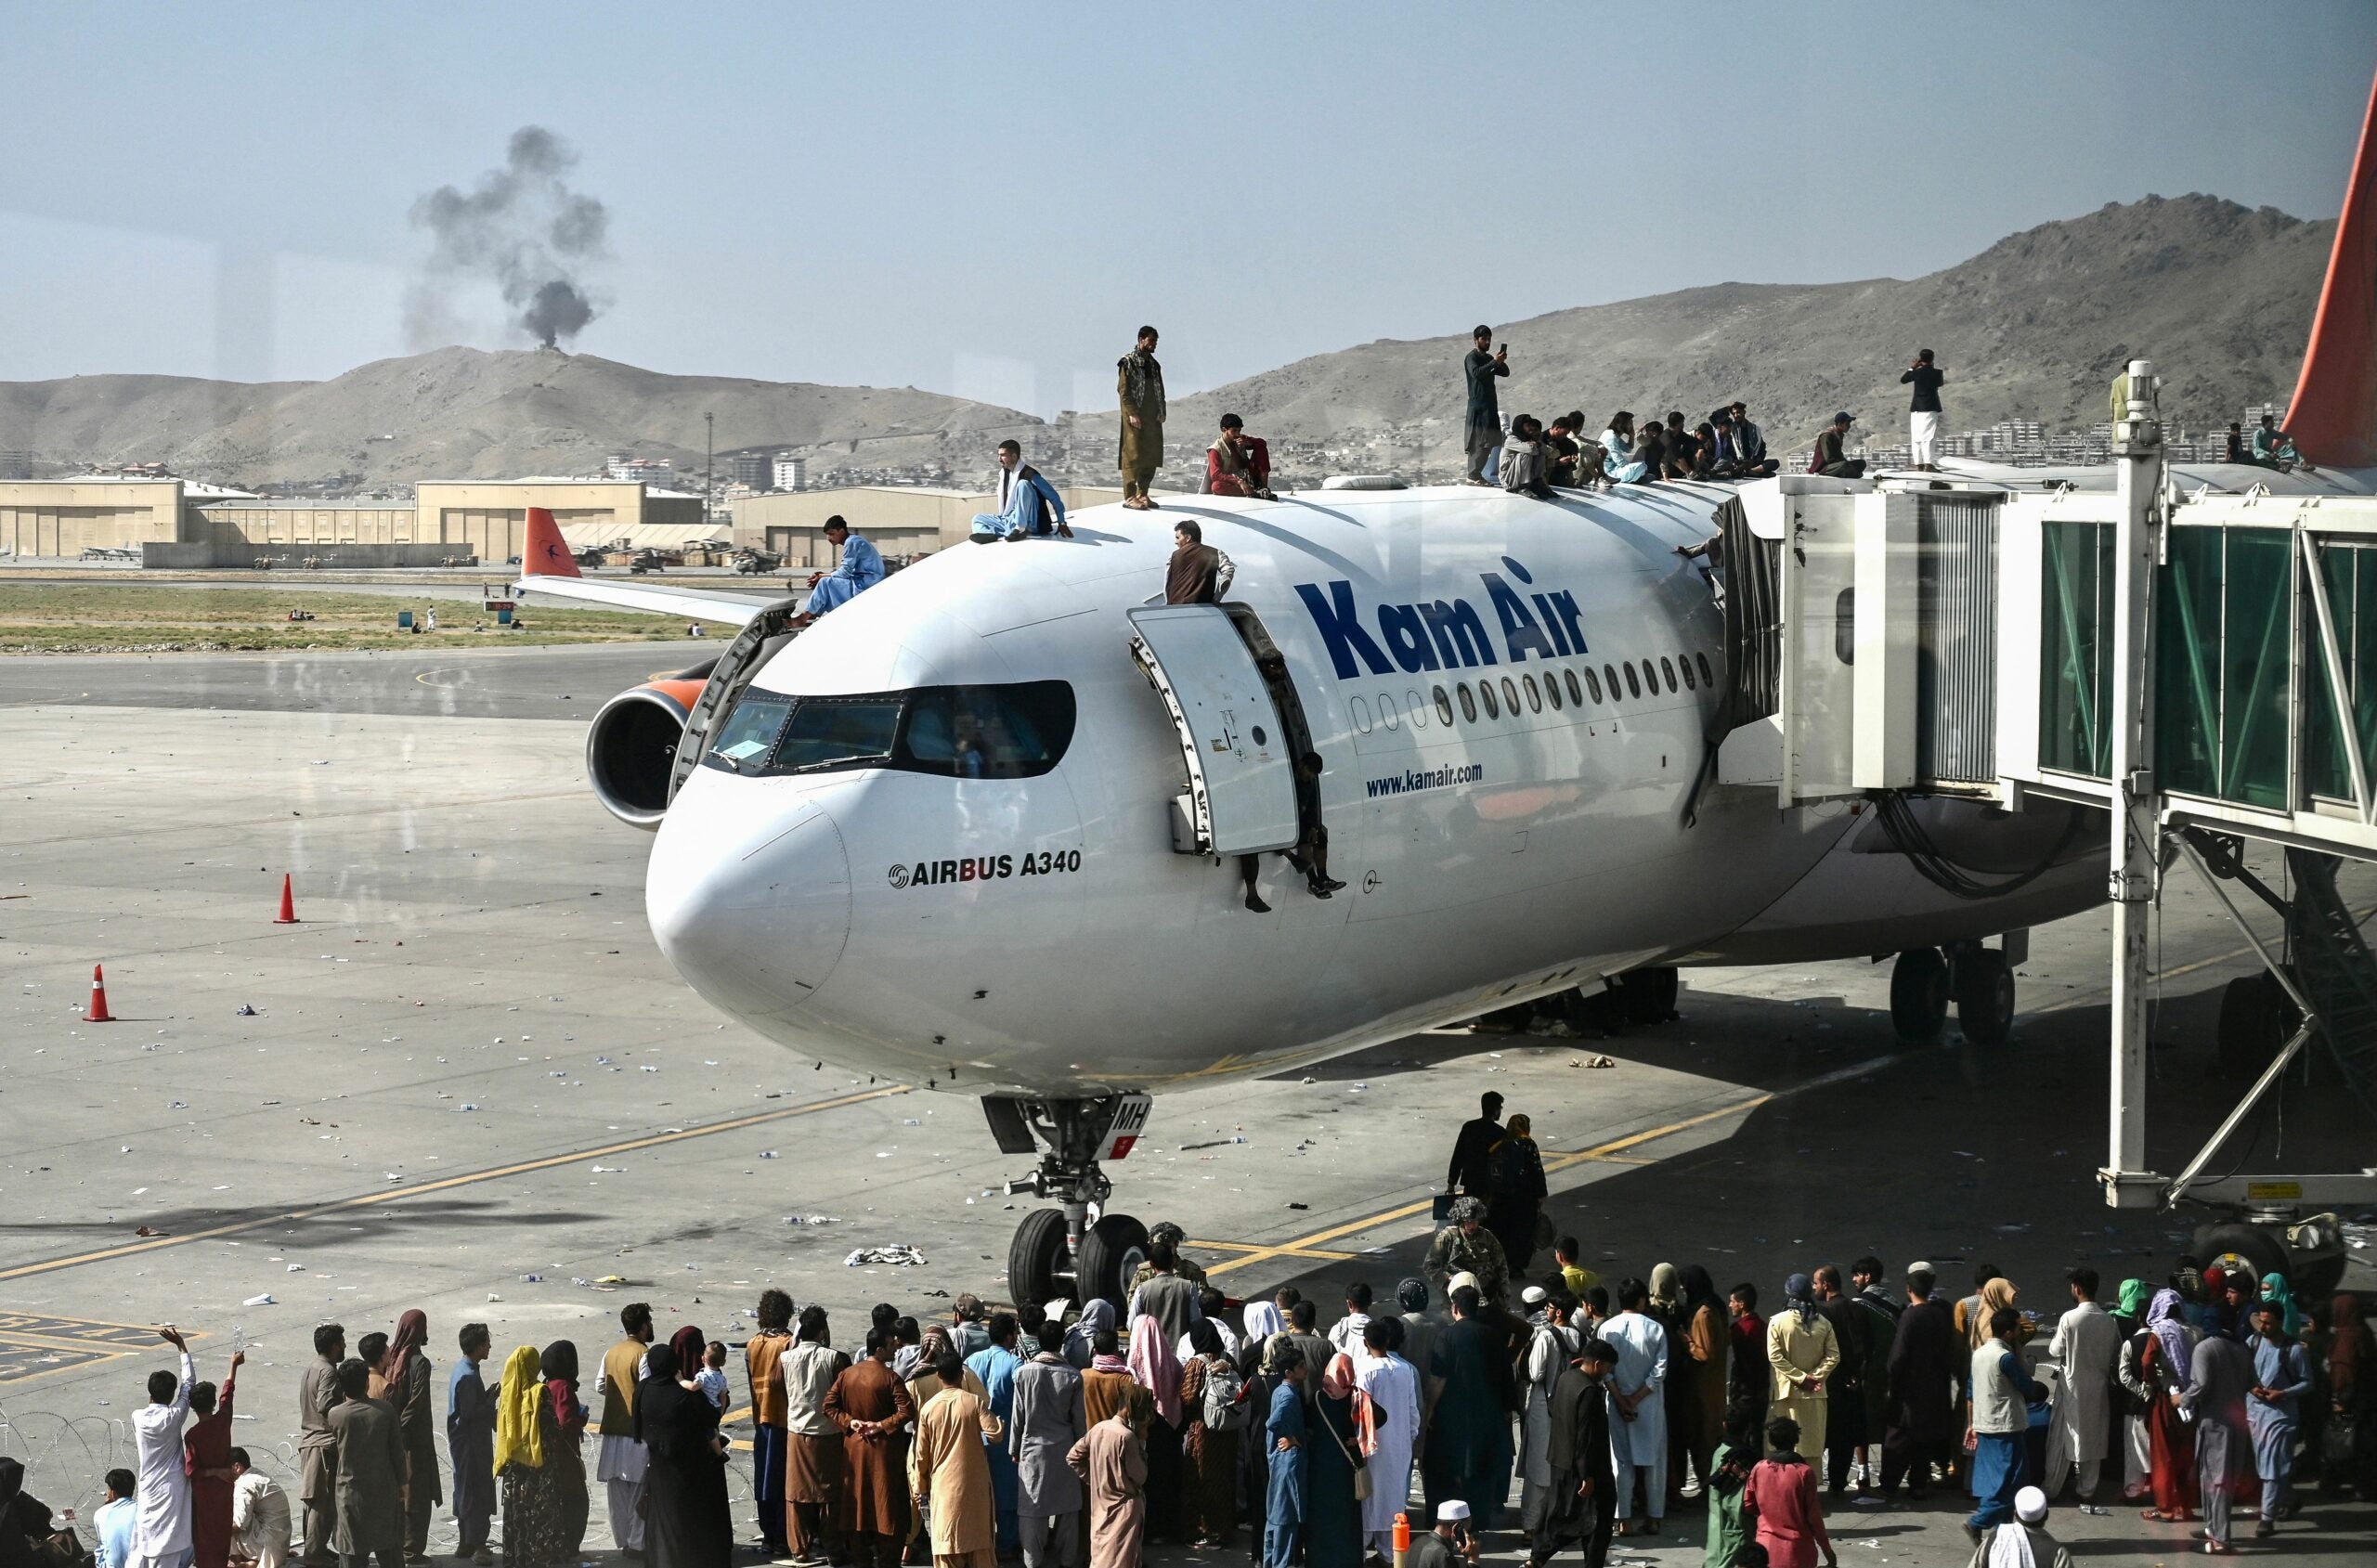 TOPSHOT - Afghan people climb atop a plane as they wait at the Kabul airport in Kabul on August 16, 2021, after a stunningly swift end to Afghanistan's 20-year war, as thousands of people mobbed the city's airport trying to flee the group's feared hardline brand of Islamist rule. (Photo by Wakil Kohsar / AFP) (Photo by WAKIL KOHSAR/AFP via Getty Images)